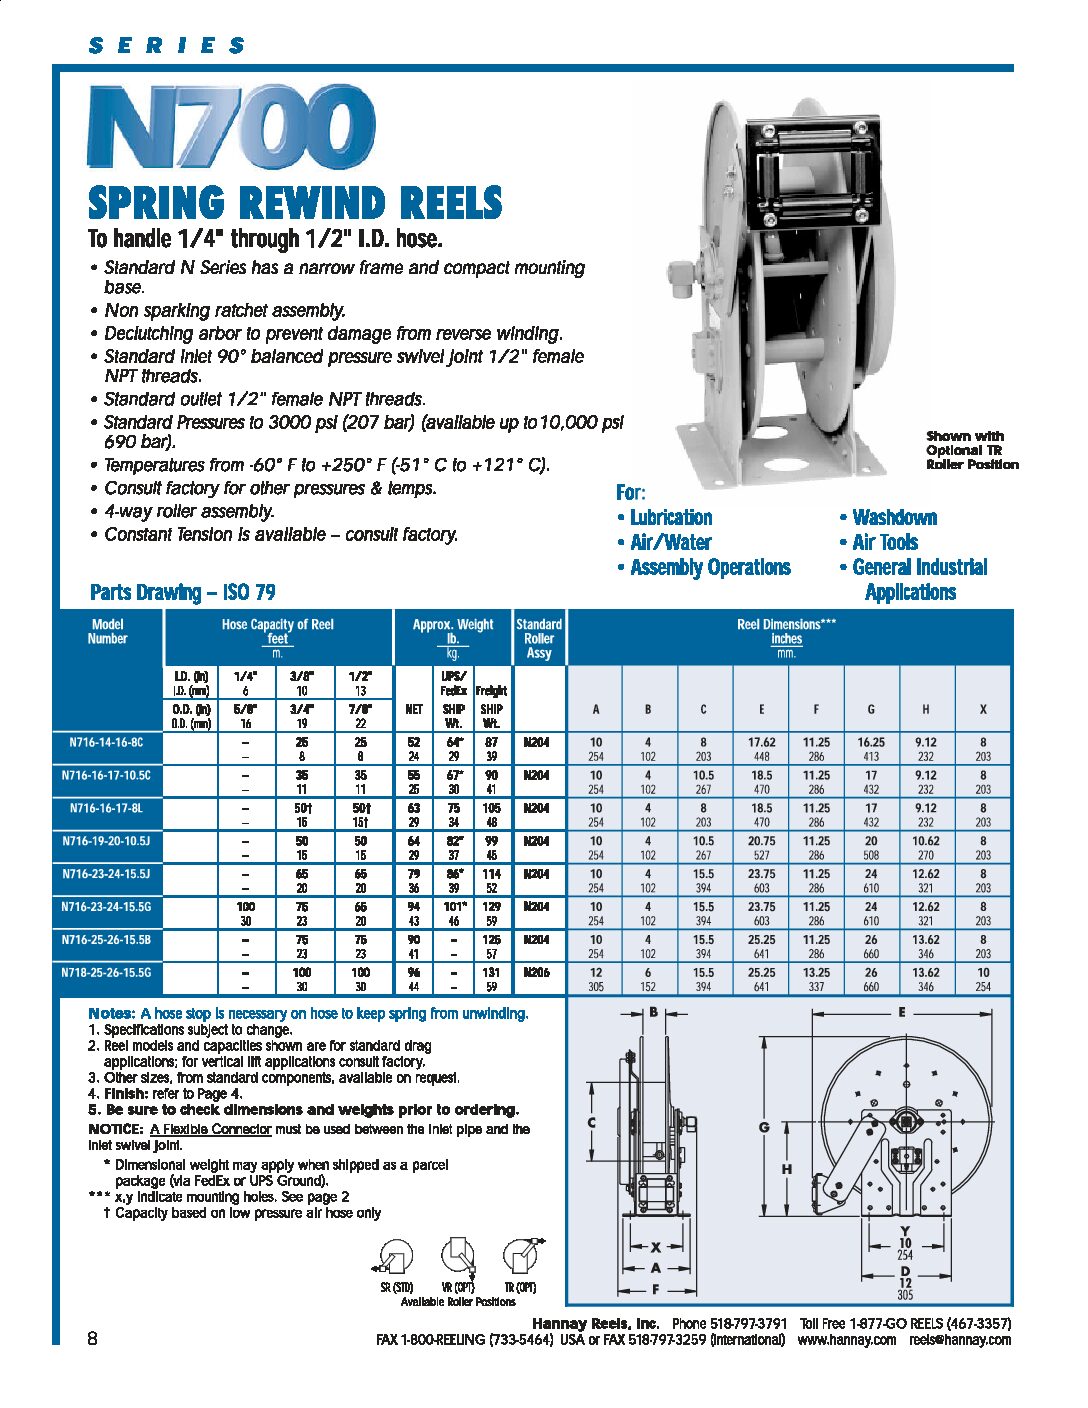 Hannay N700 and 700 Series Spring Rewind Hose Reels technical information